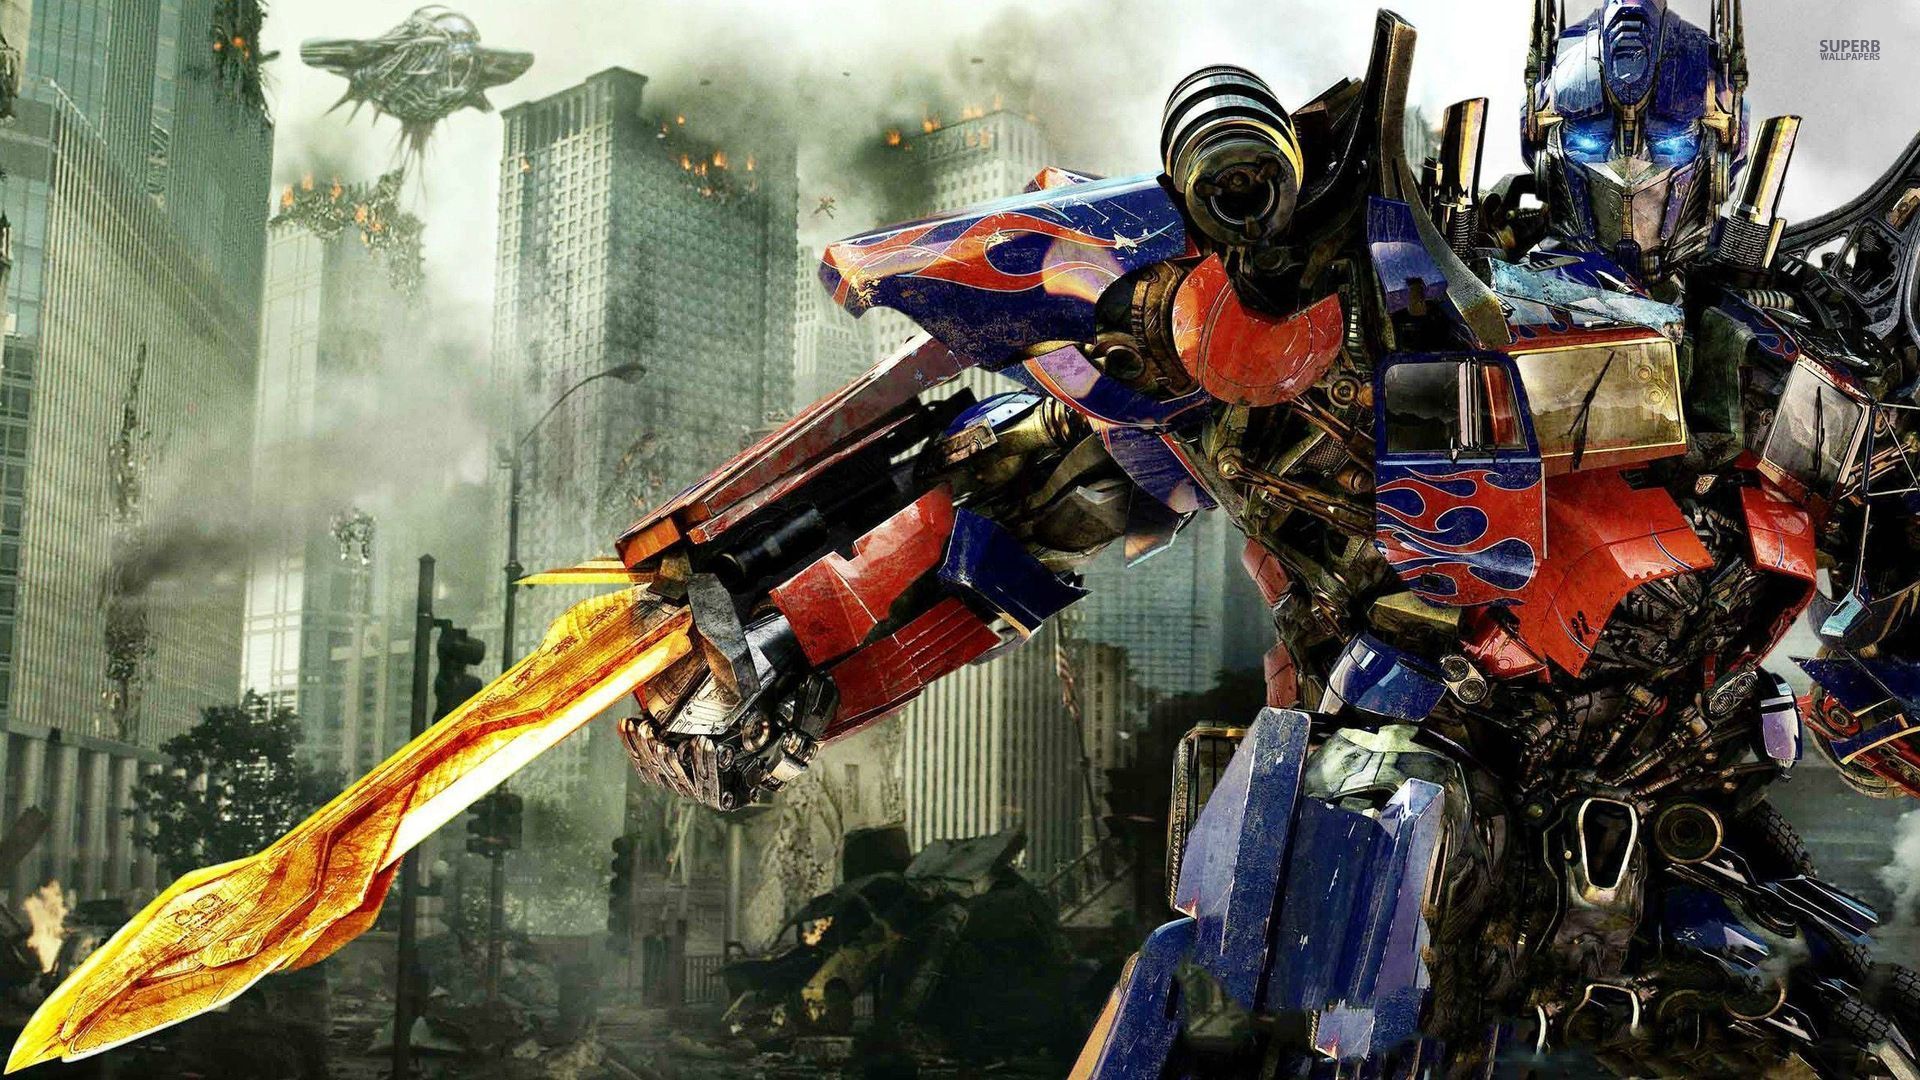 optimus prime hd wallpaper,action adventure game,pc game,fictional character,games,transformers